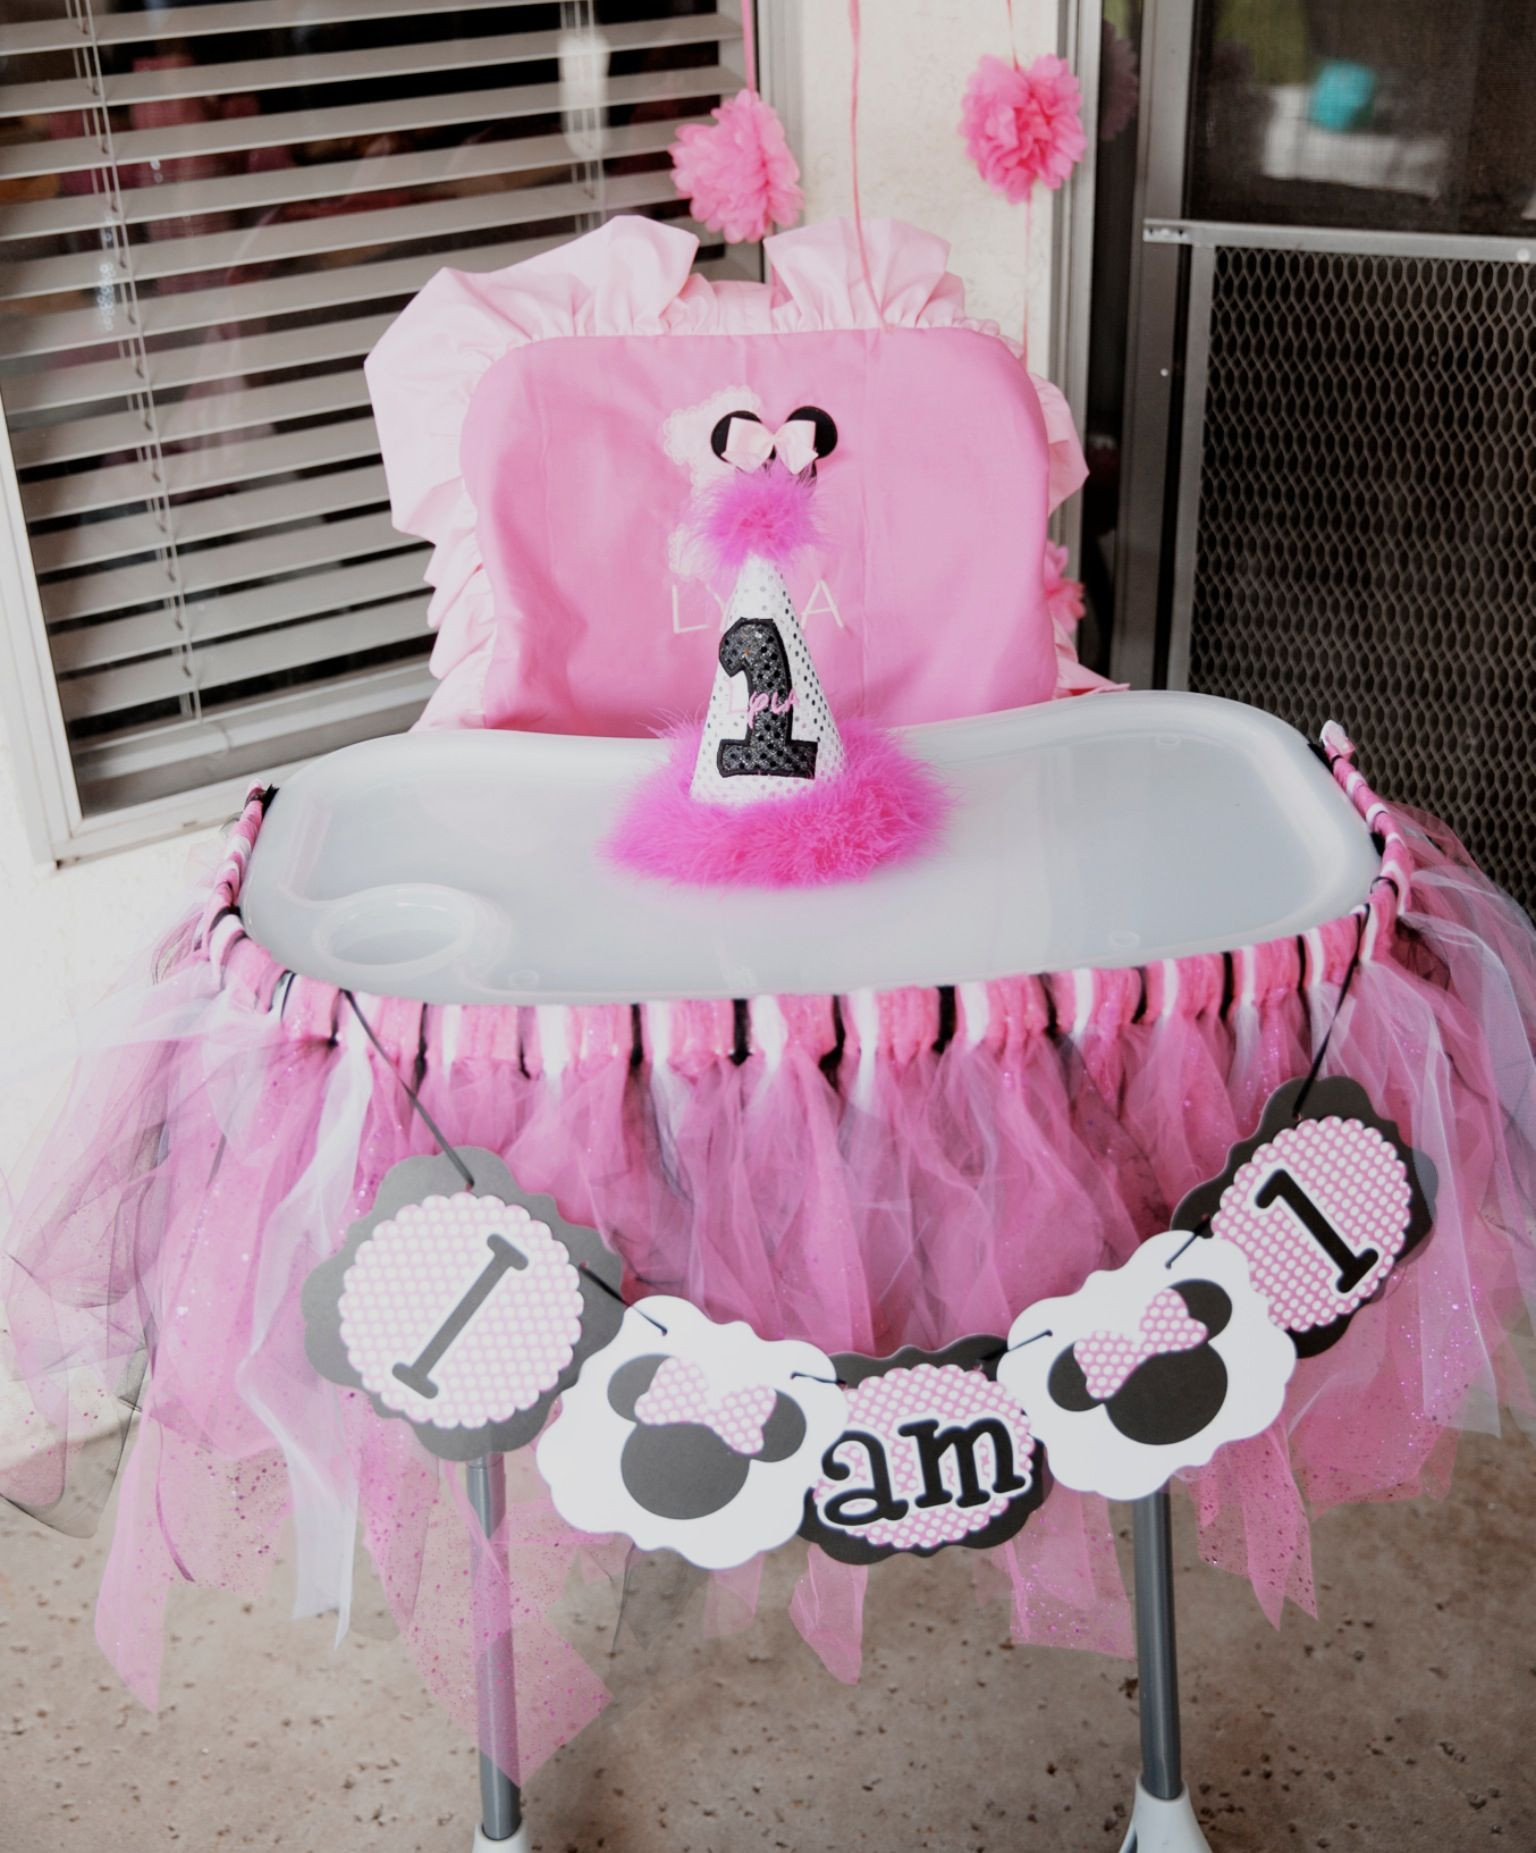 Minnie Mouse 1st Birthday Decorations
 The 25 best Minnie mouse high chair ideas on Pinterest